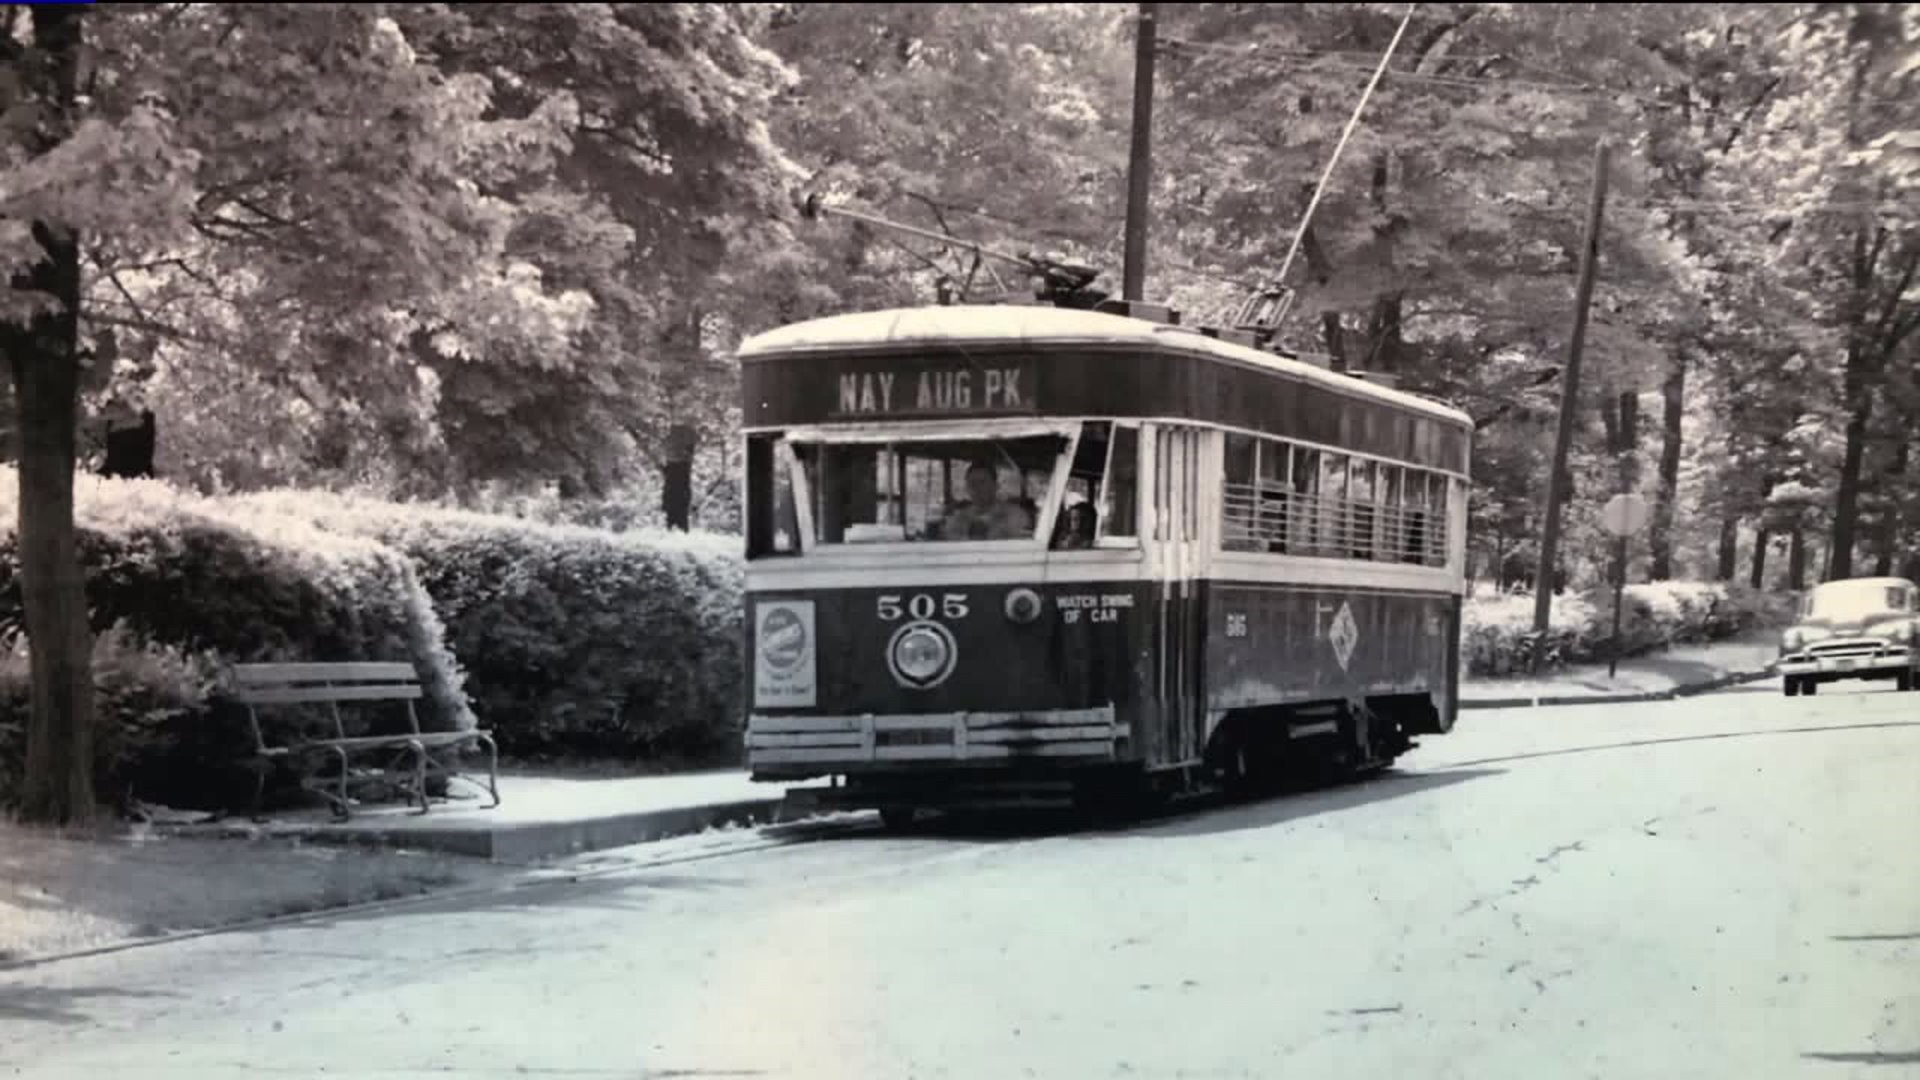 Work Continuing on Project 505 Trolley Restoration